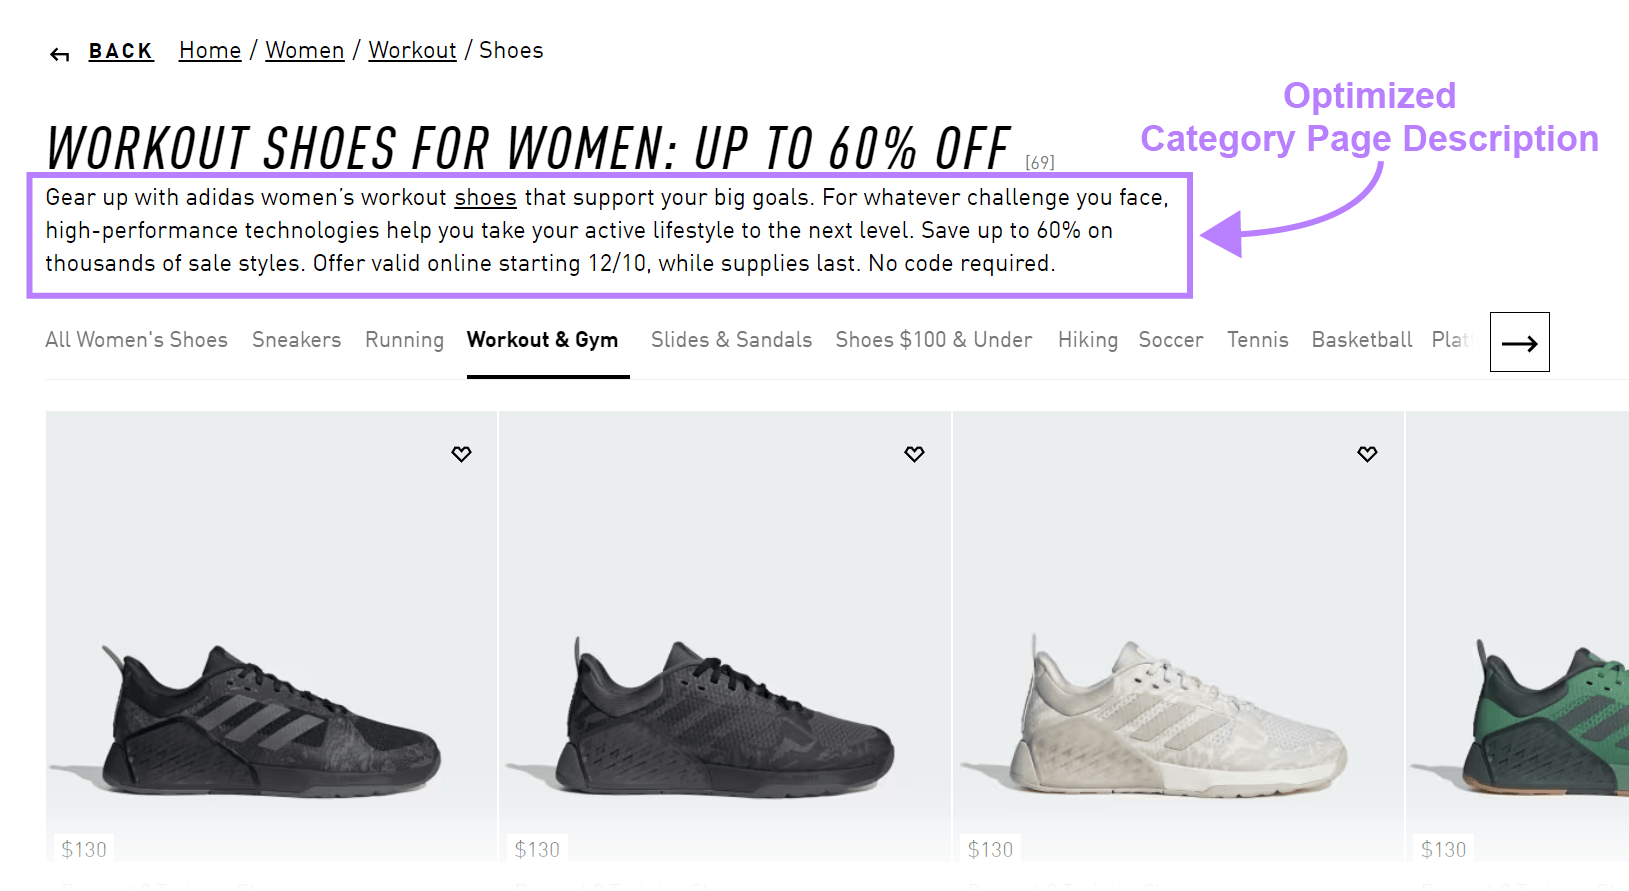 Example of a category page description by Adidas